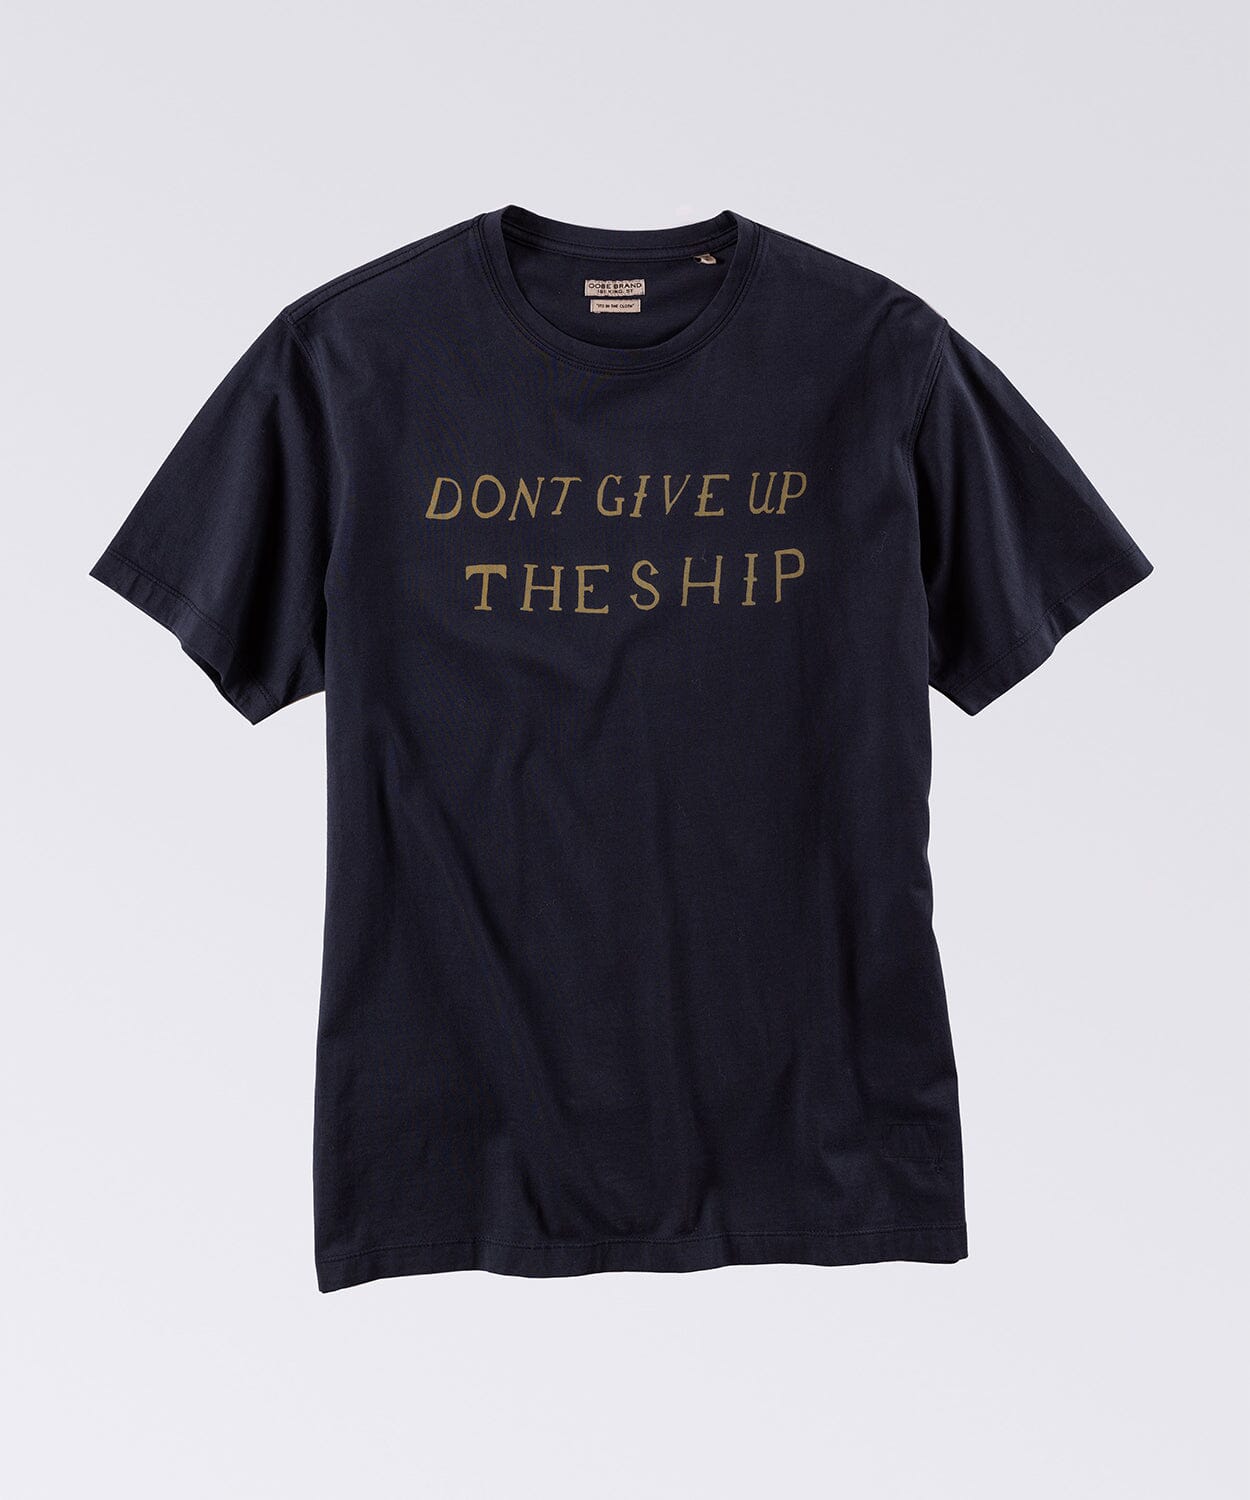 tshirt with saying dont give up the ship by oobe brand